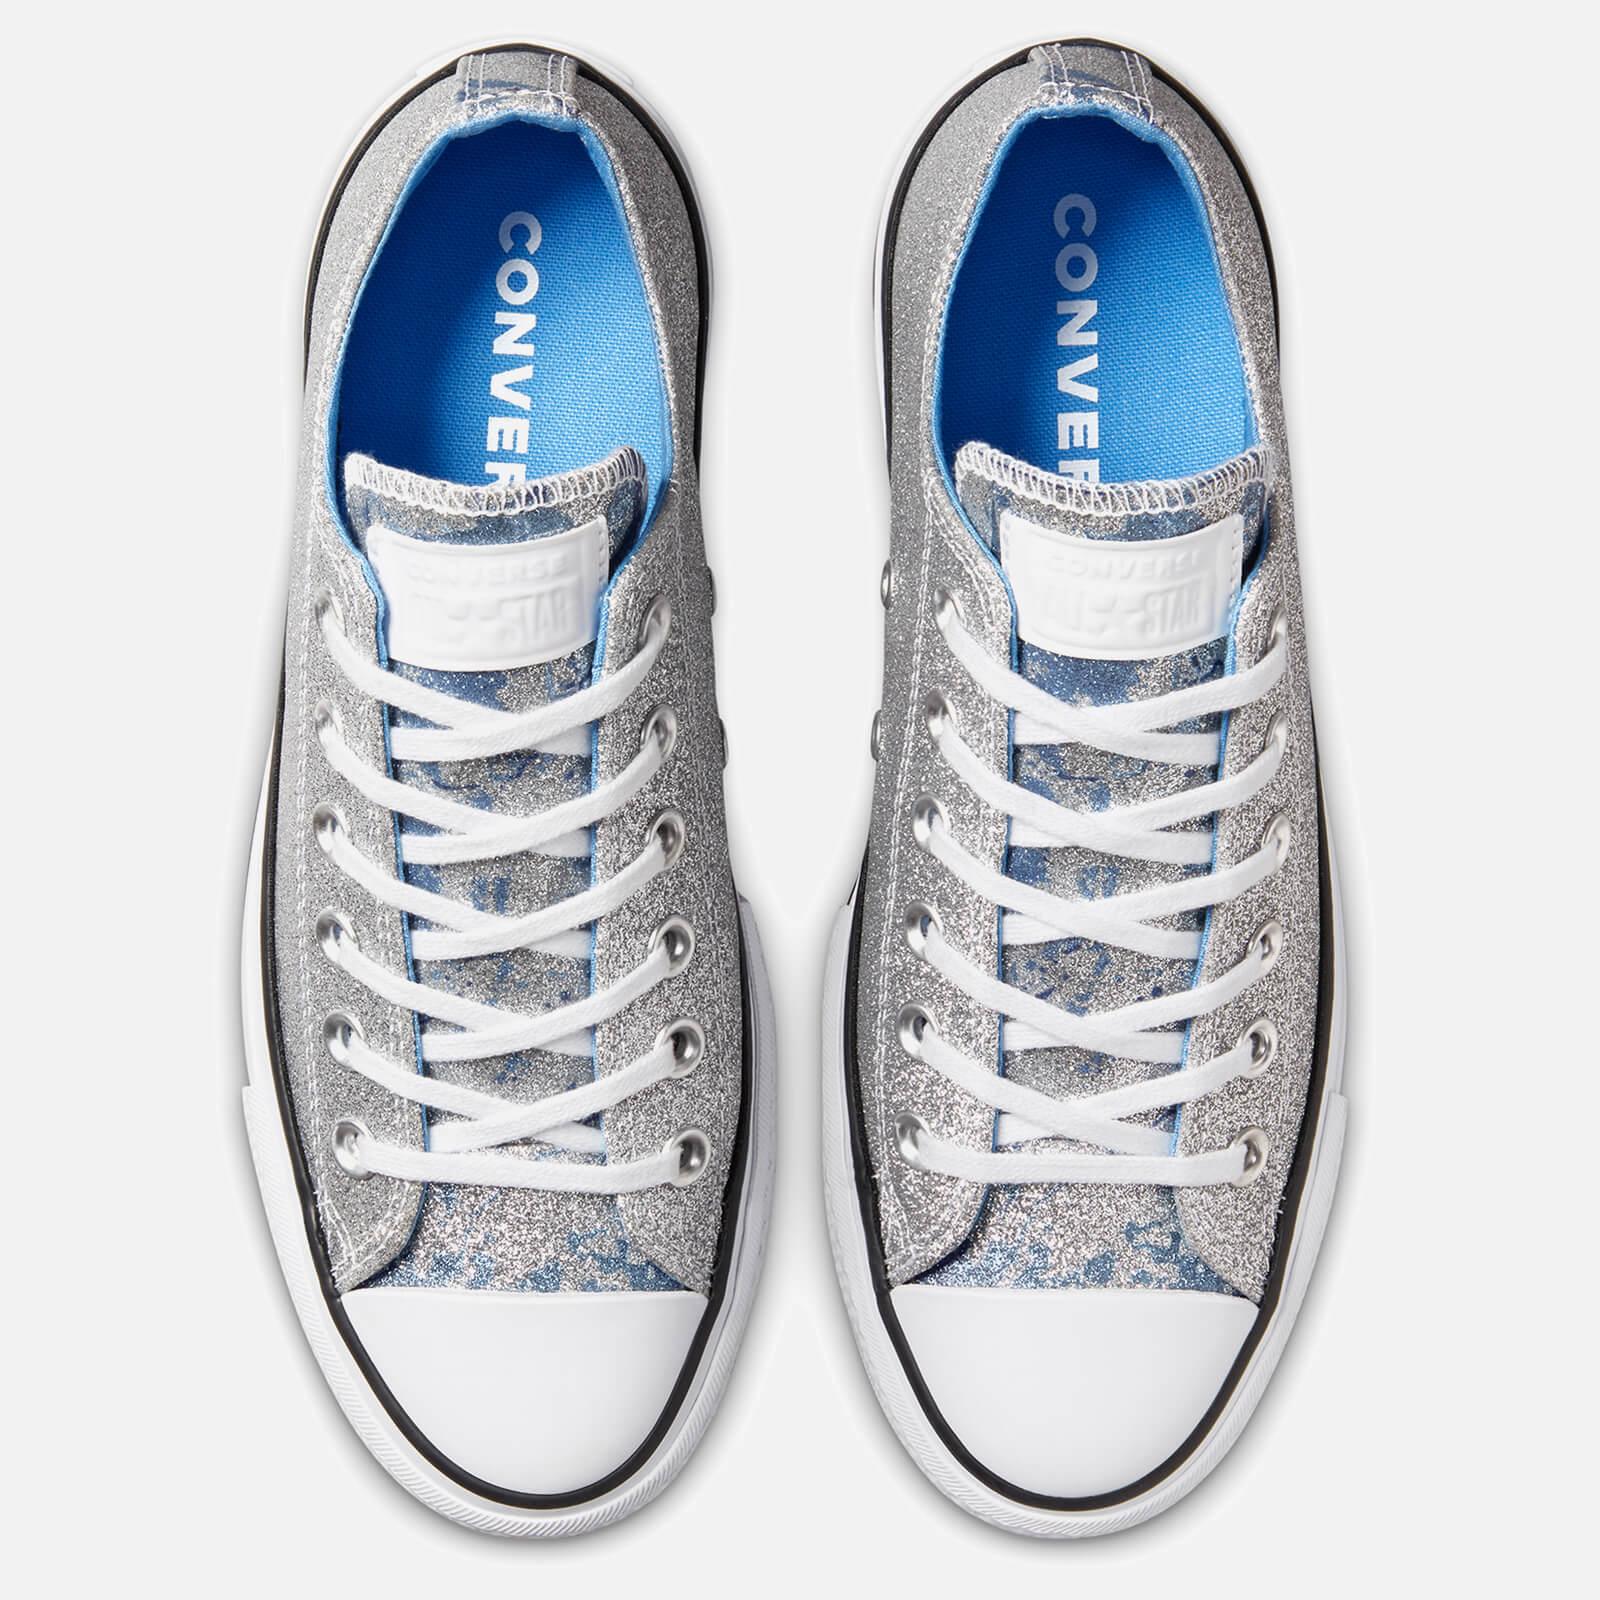 Converse Chuck Taylor All Star Hybrid Shine Lift Ox Trainers in Metallic |  Lyst